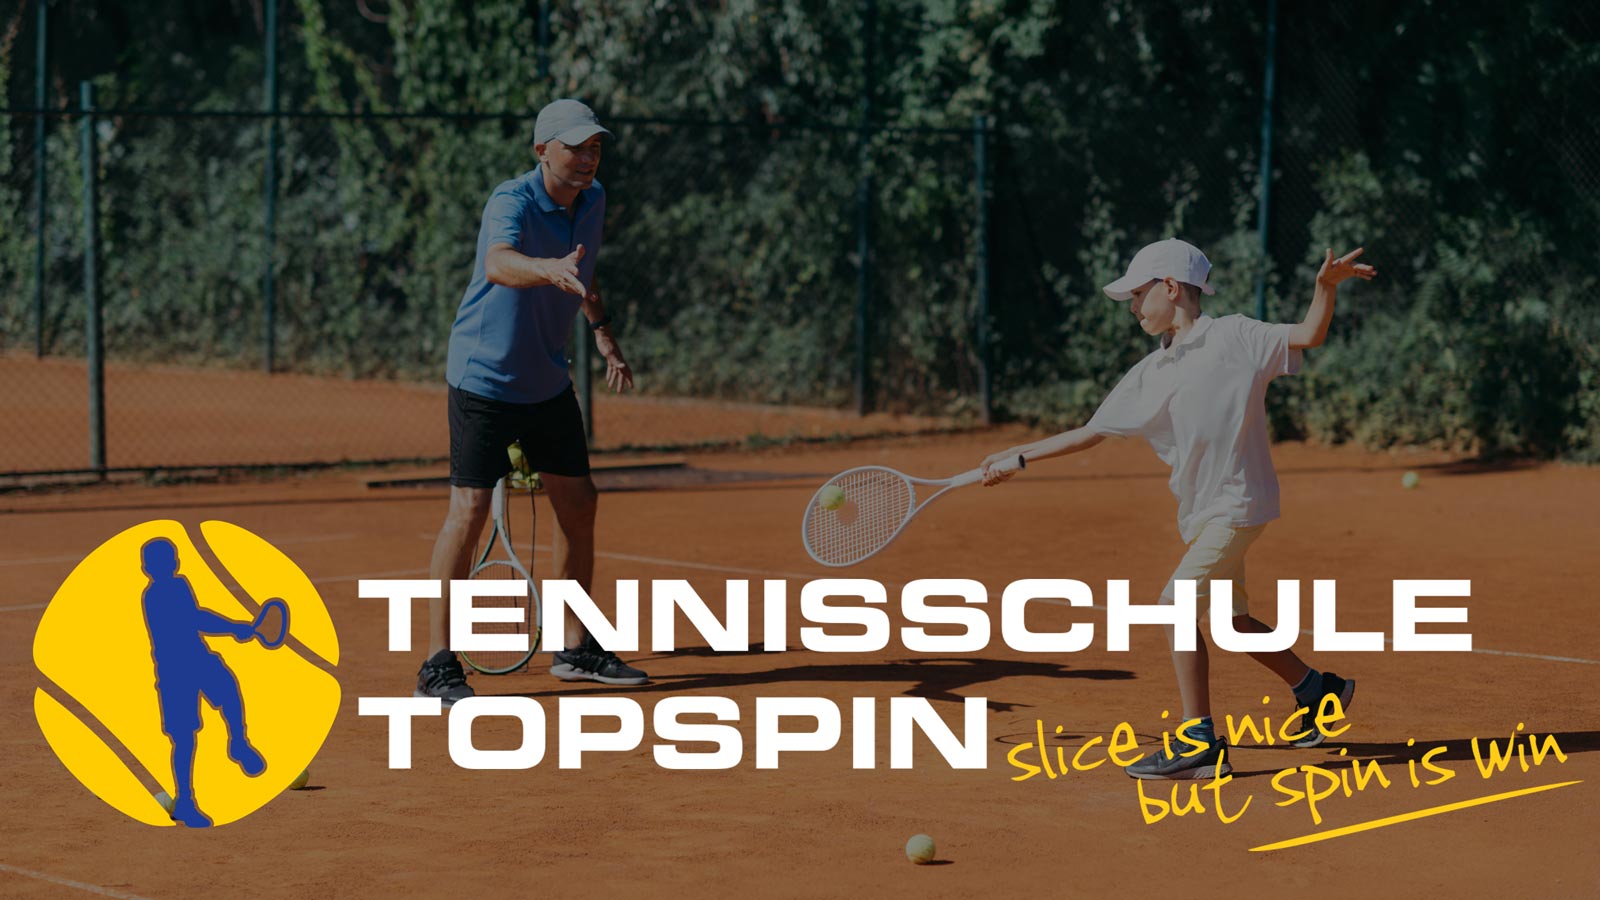 (c) Ts-topspin.ch